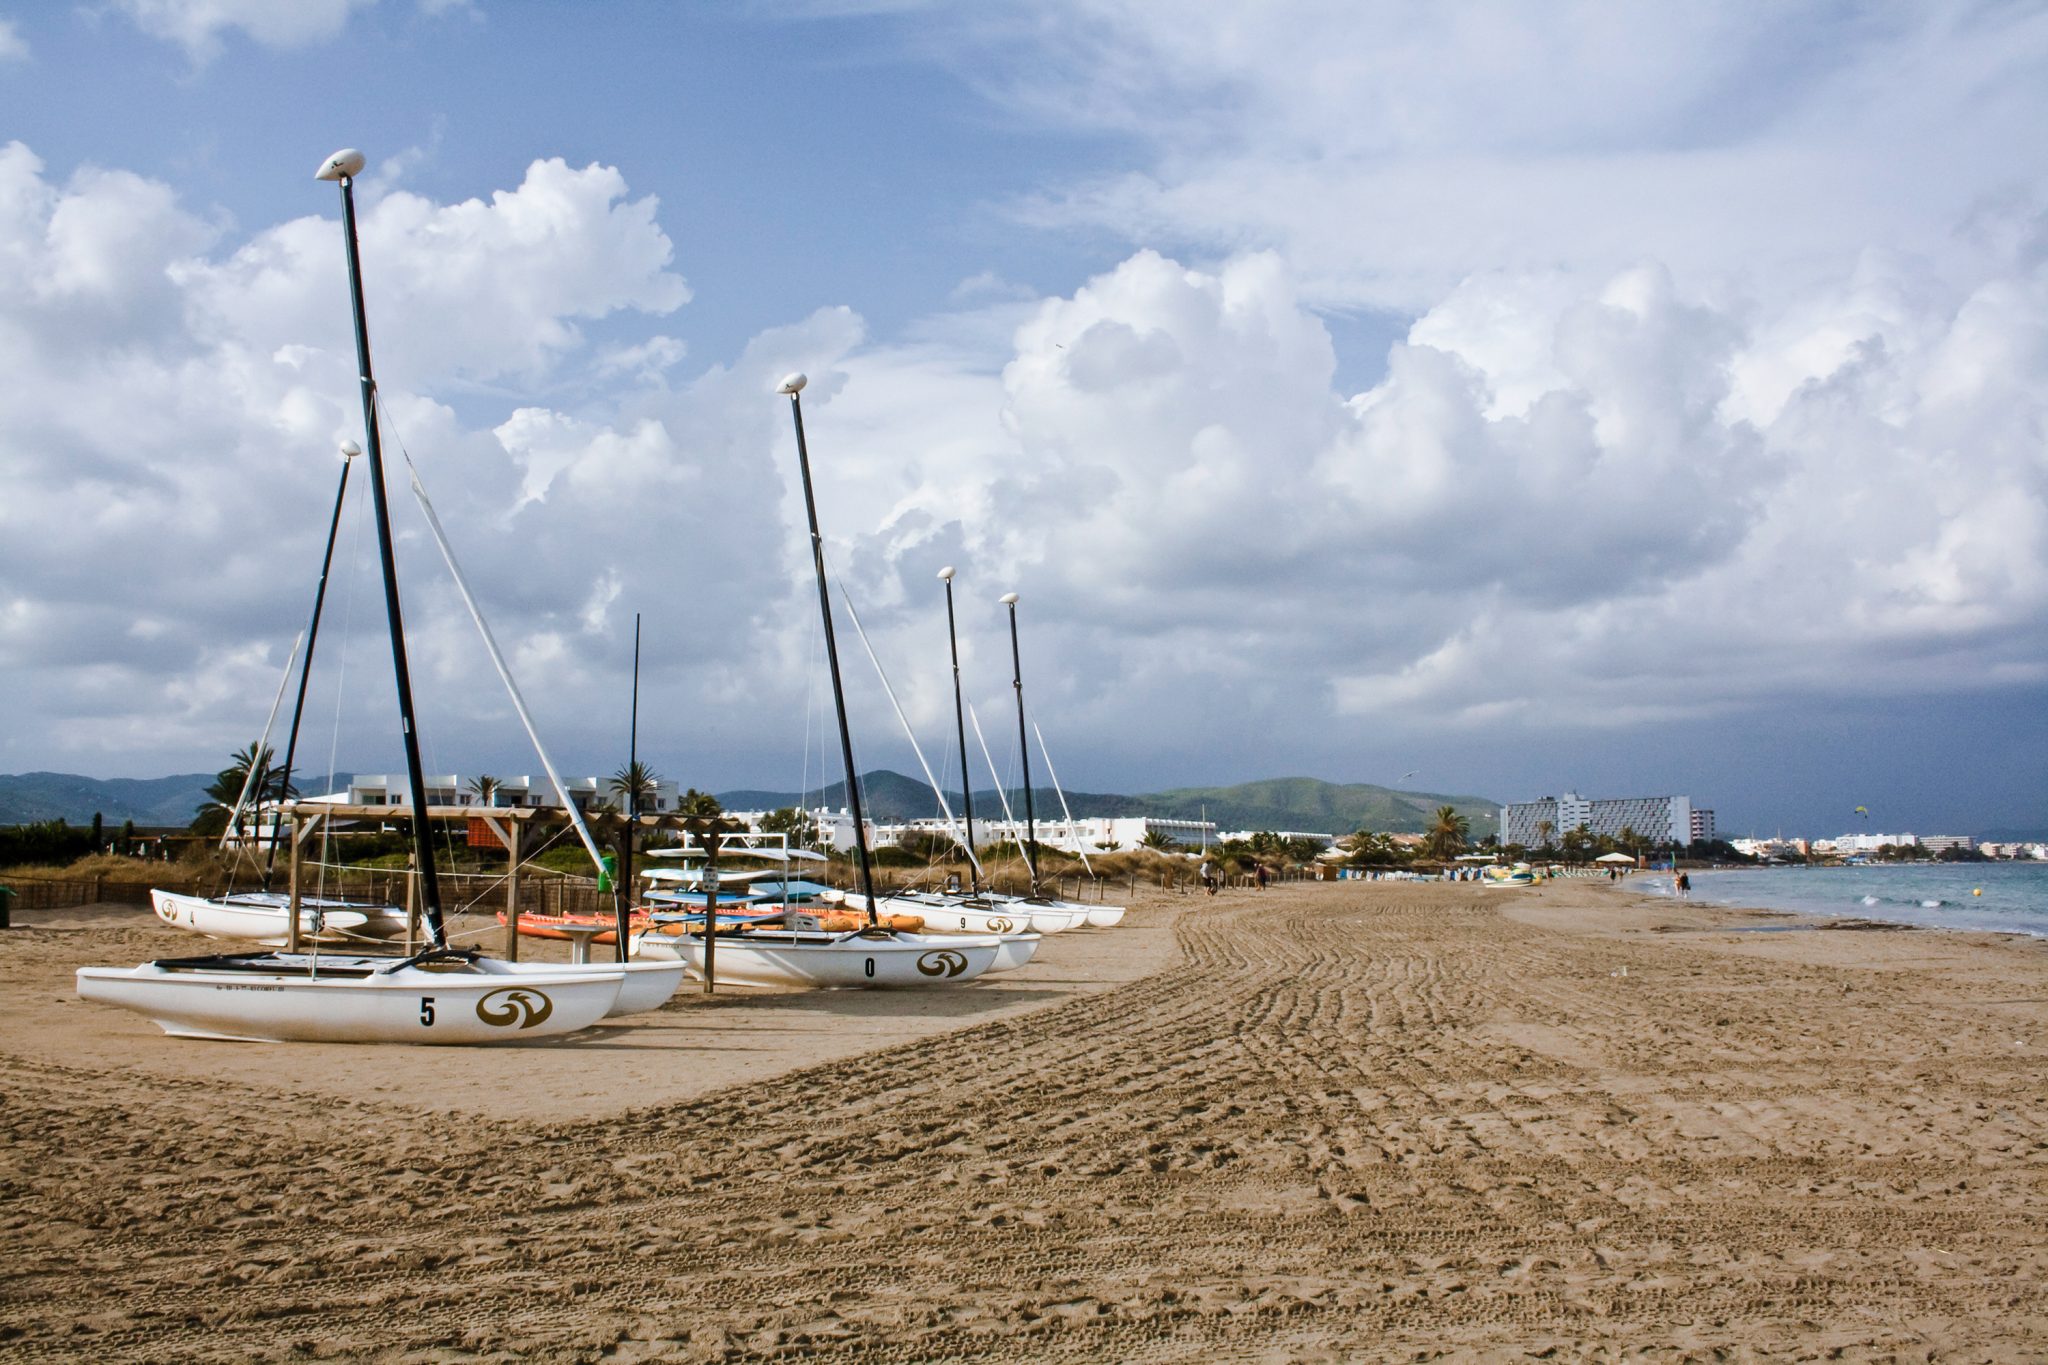 Cloudy day on a beach in Eivissa (Illes Balears, Spain), with boats in the sand.